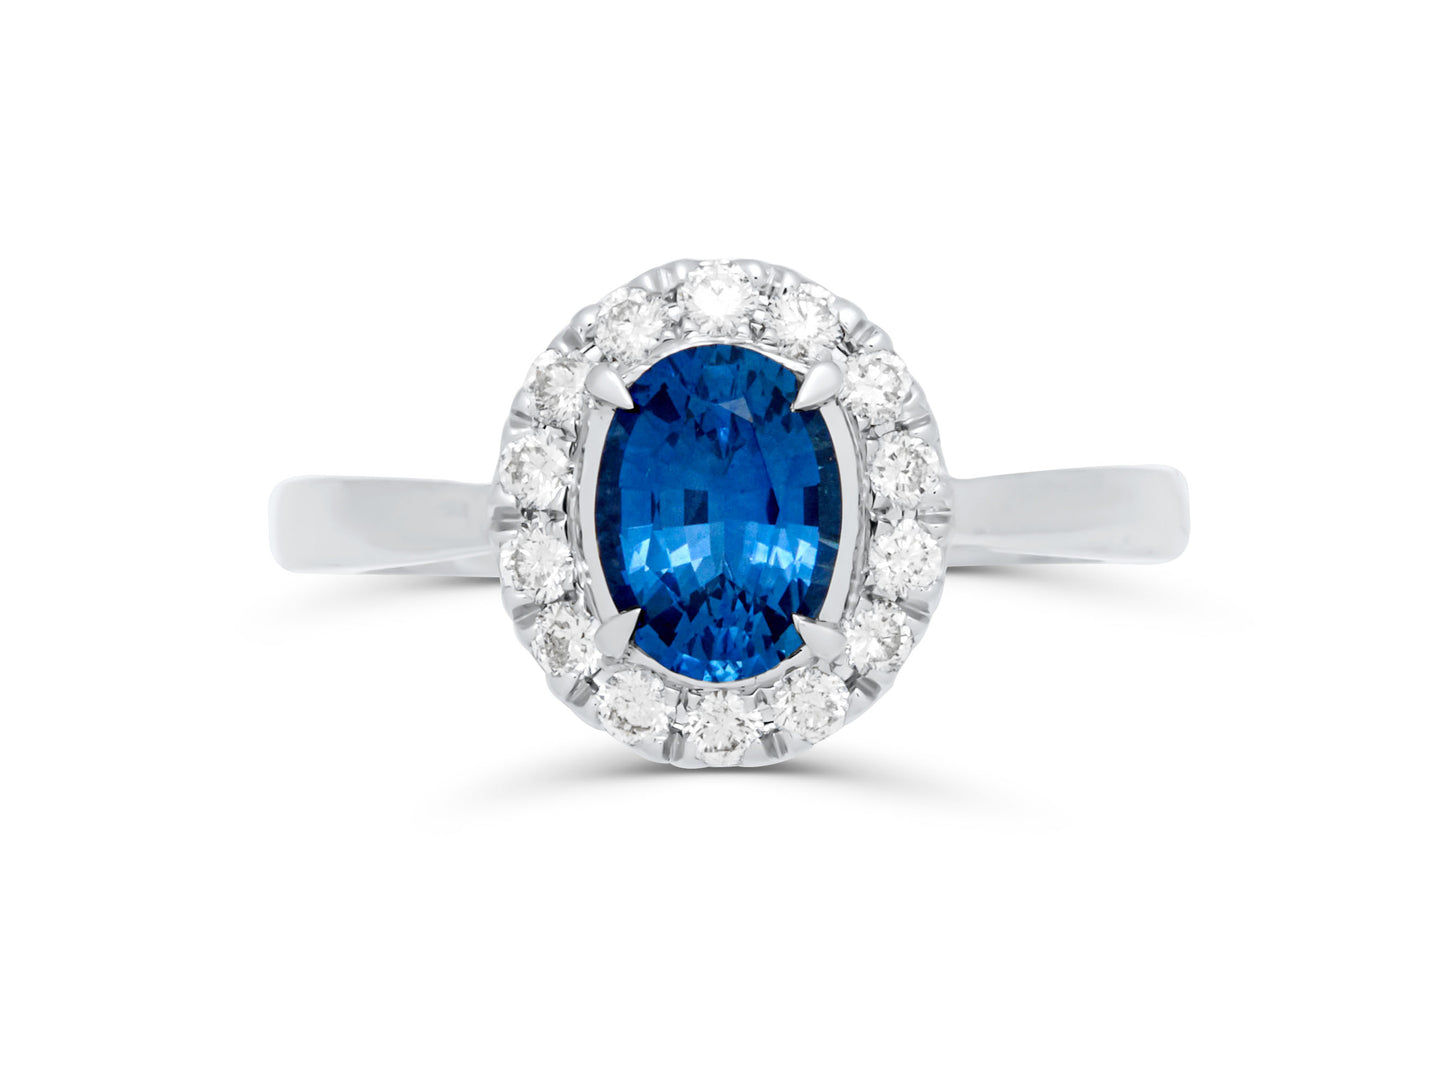 Sapphire Oval Cut Platinum Cocktail Ring